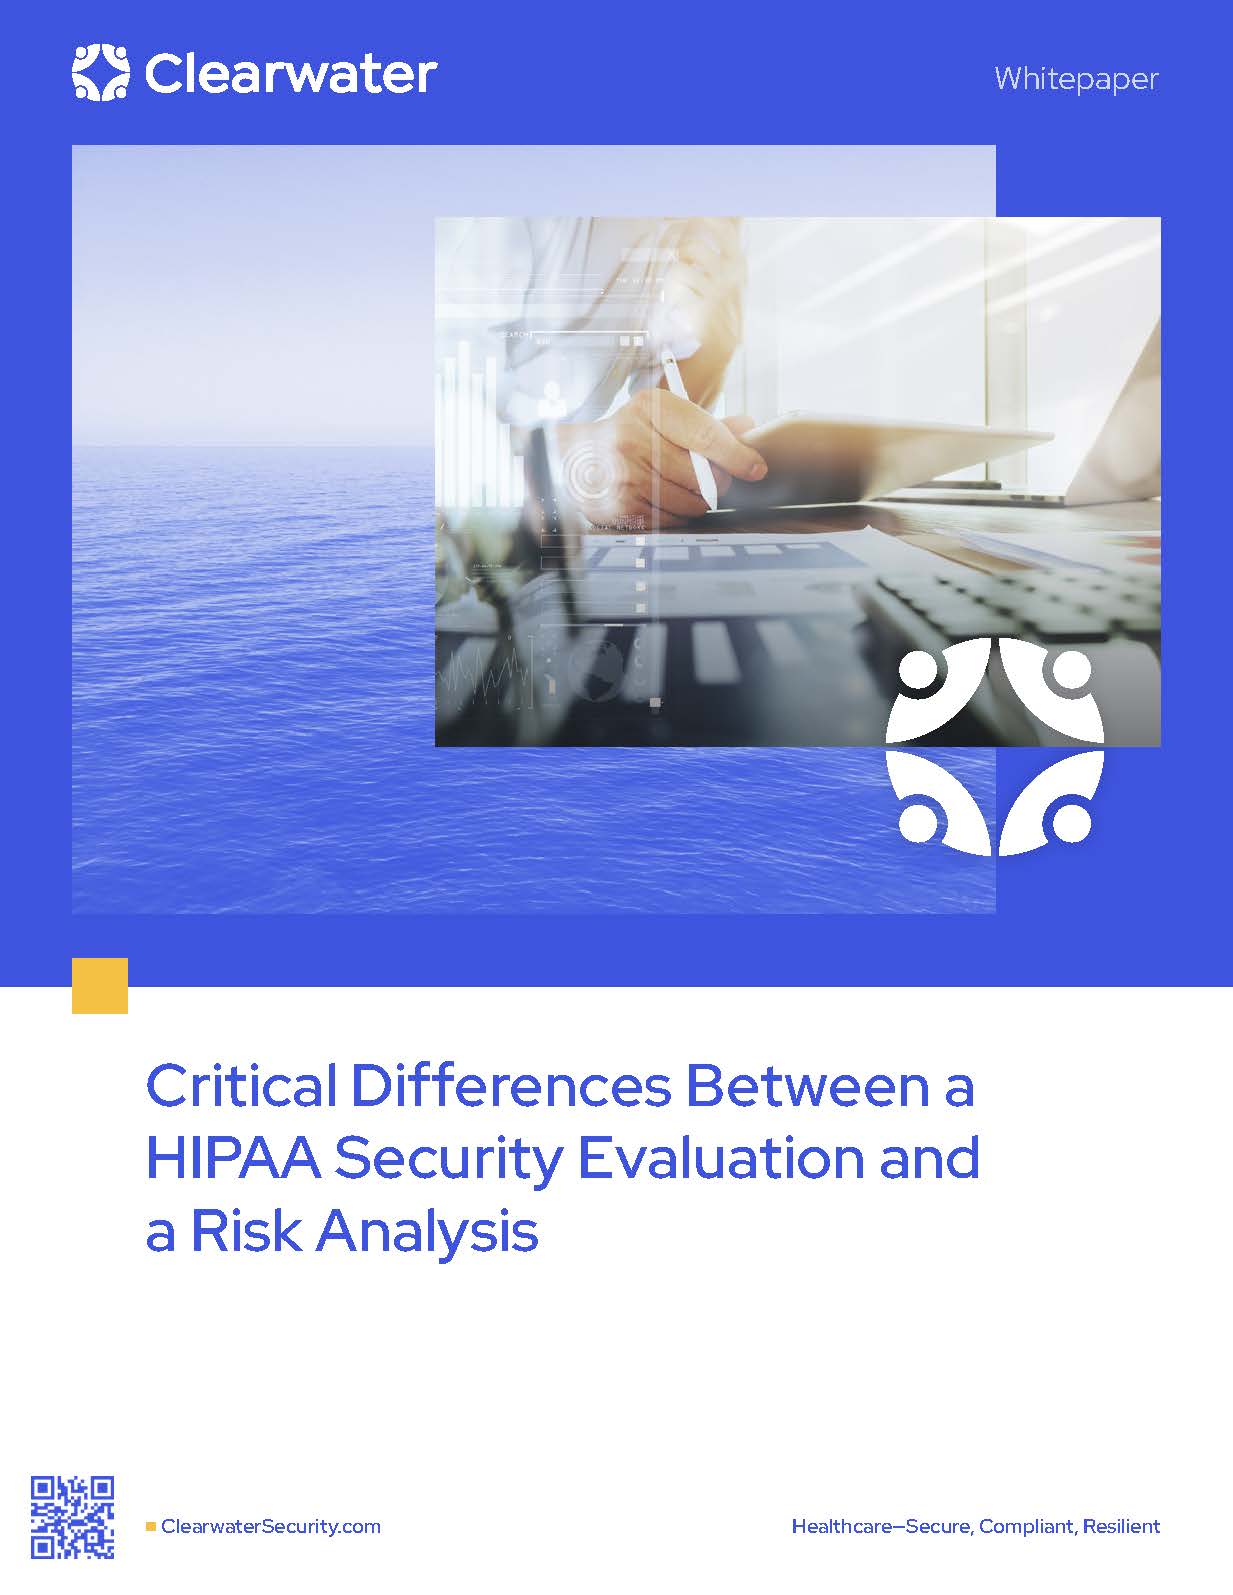 Critical Differences Between a HIPAA Security Evaluation and a Risk Analysis by Clearwater